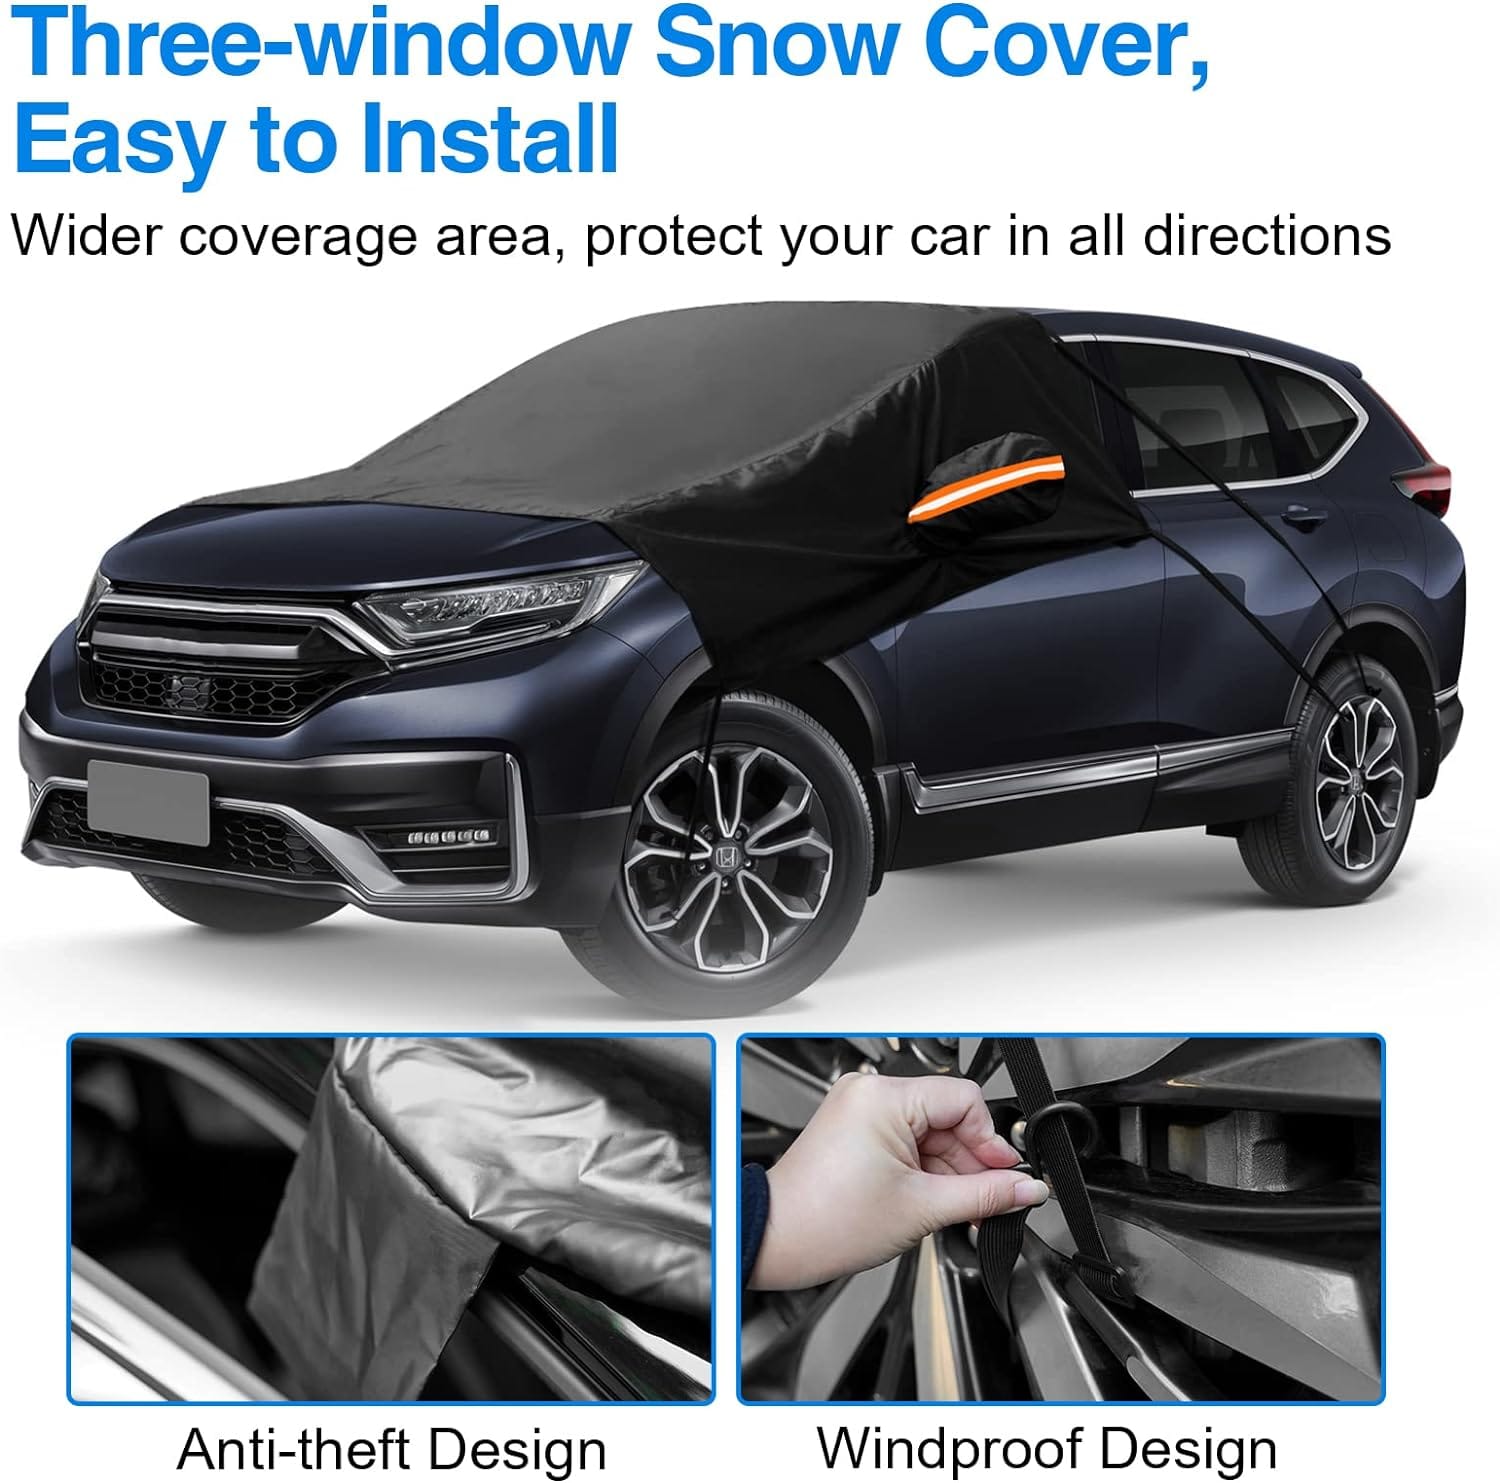 SUPAREE Car Windshield Sun Shade with Side Mirror Covers for Most Cars & SUVs Product description